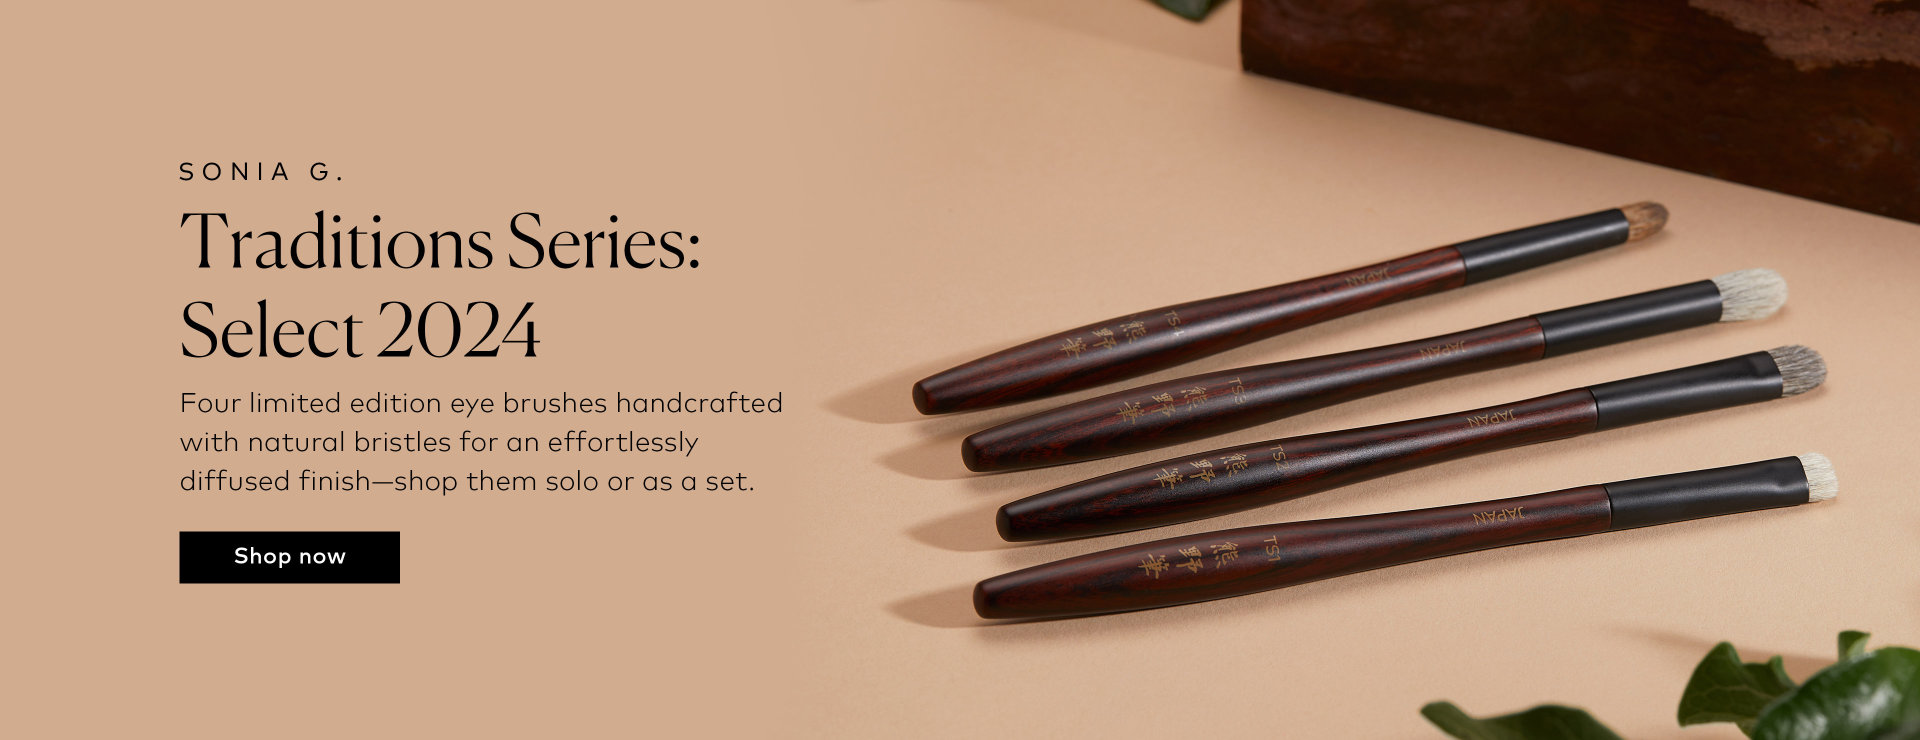 Shop the Sonia G. Traditions Series: Select 2024 on Beautylish.com! 